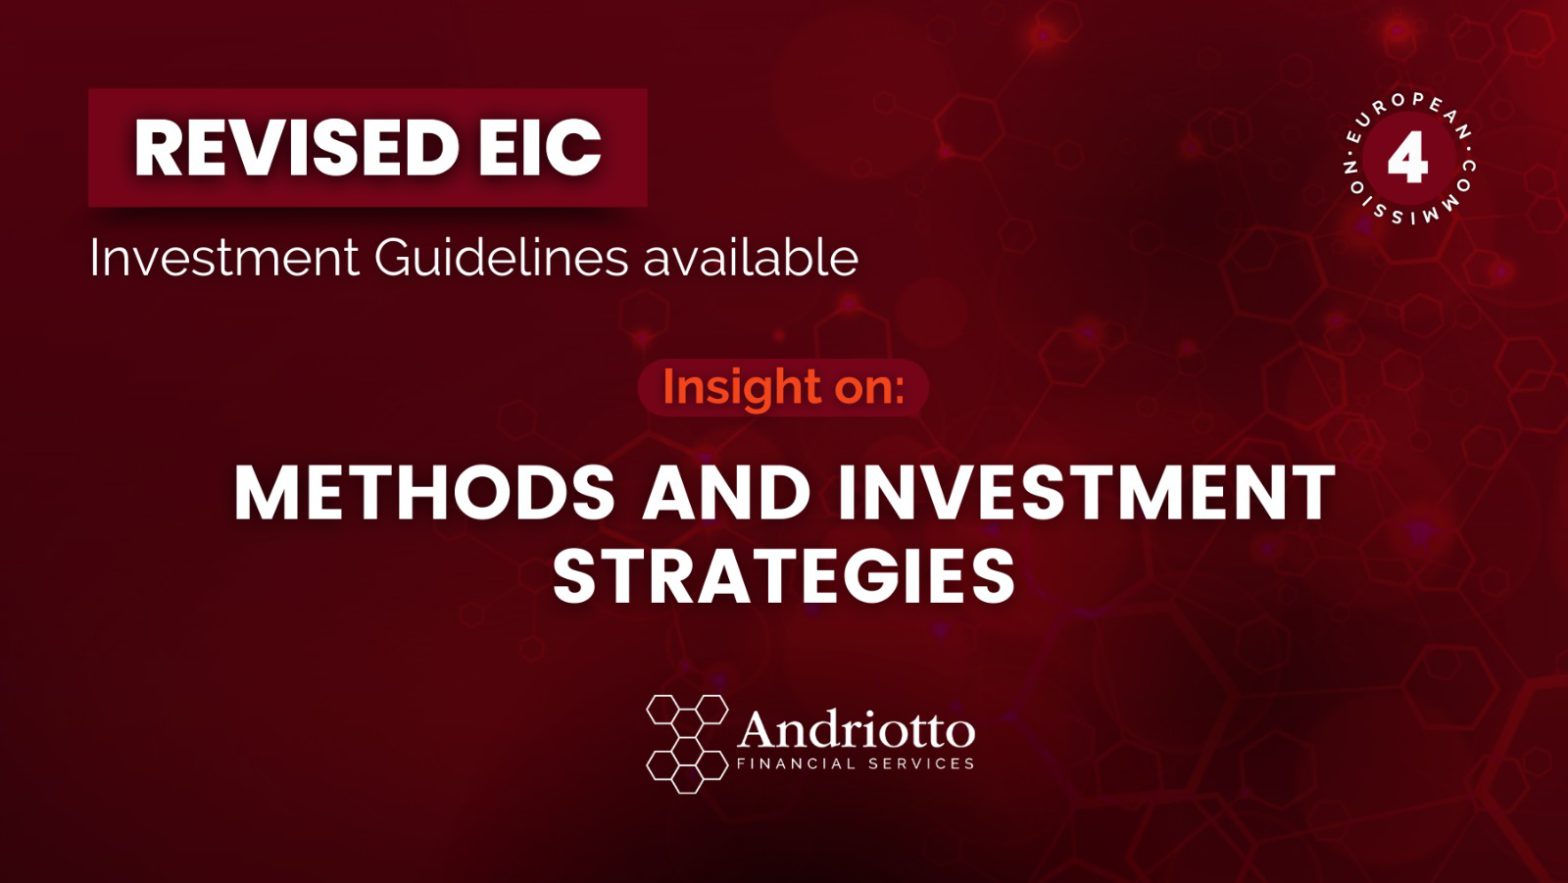 Red background with the title "Revised EIC Investment Guidelines available. Insight on methods and investment strategies".